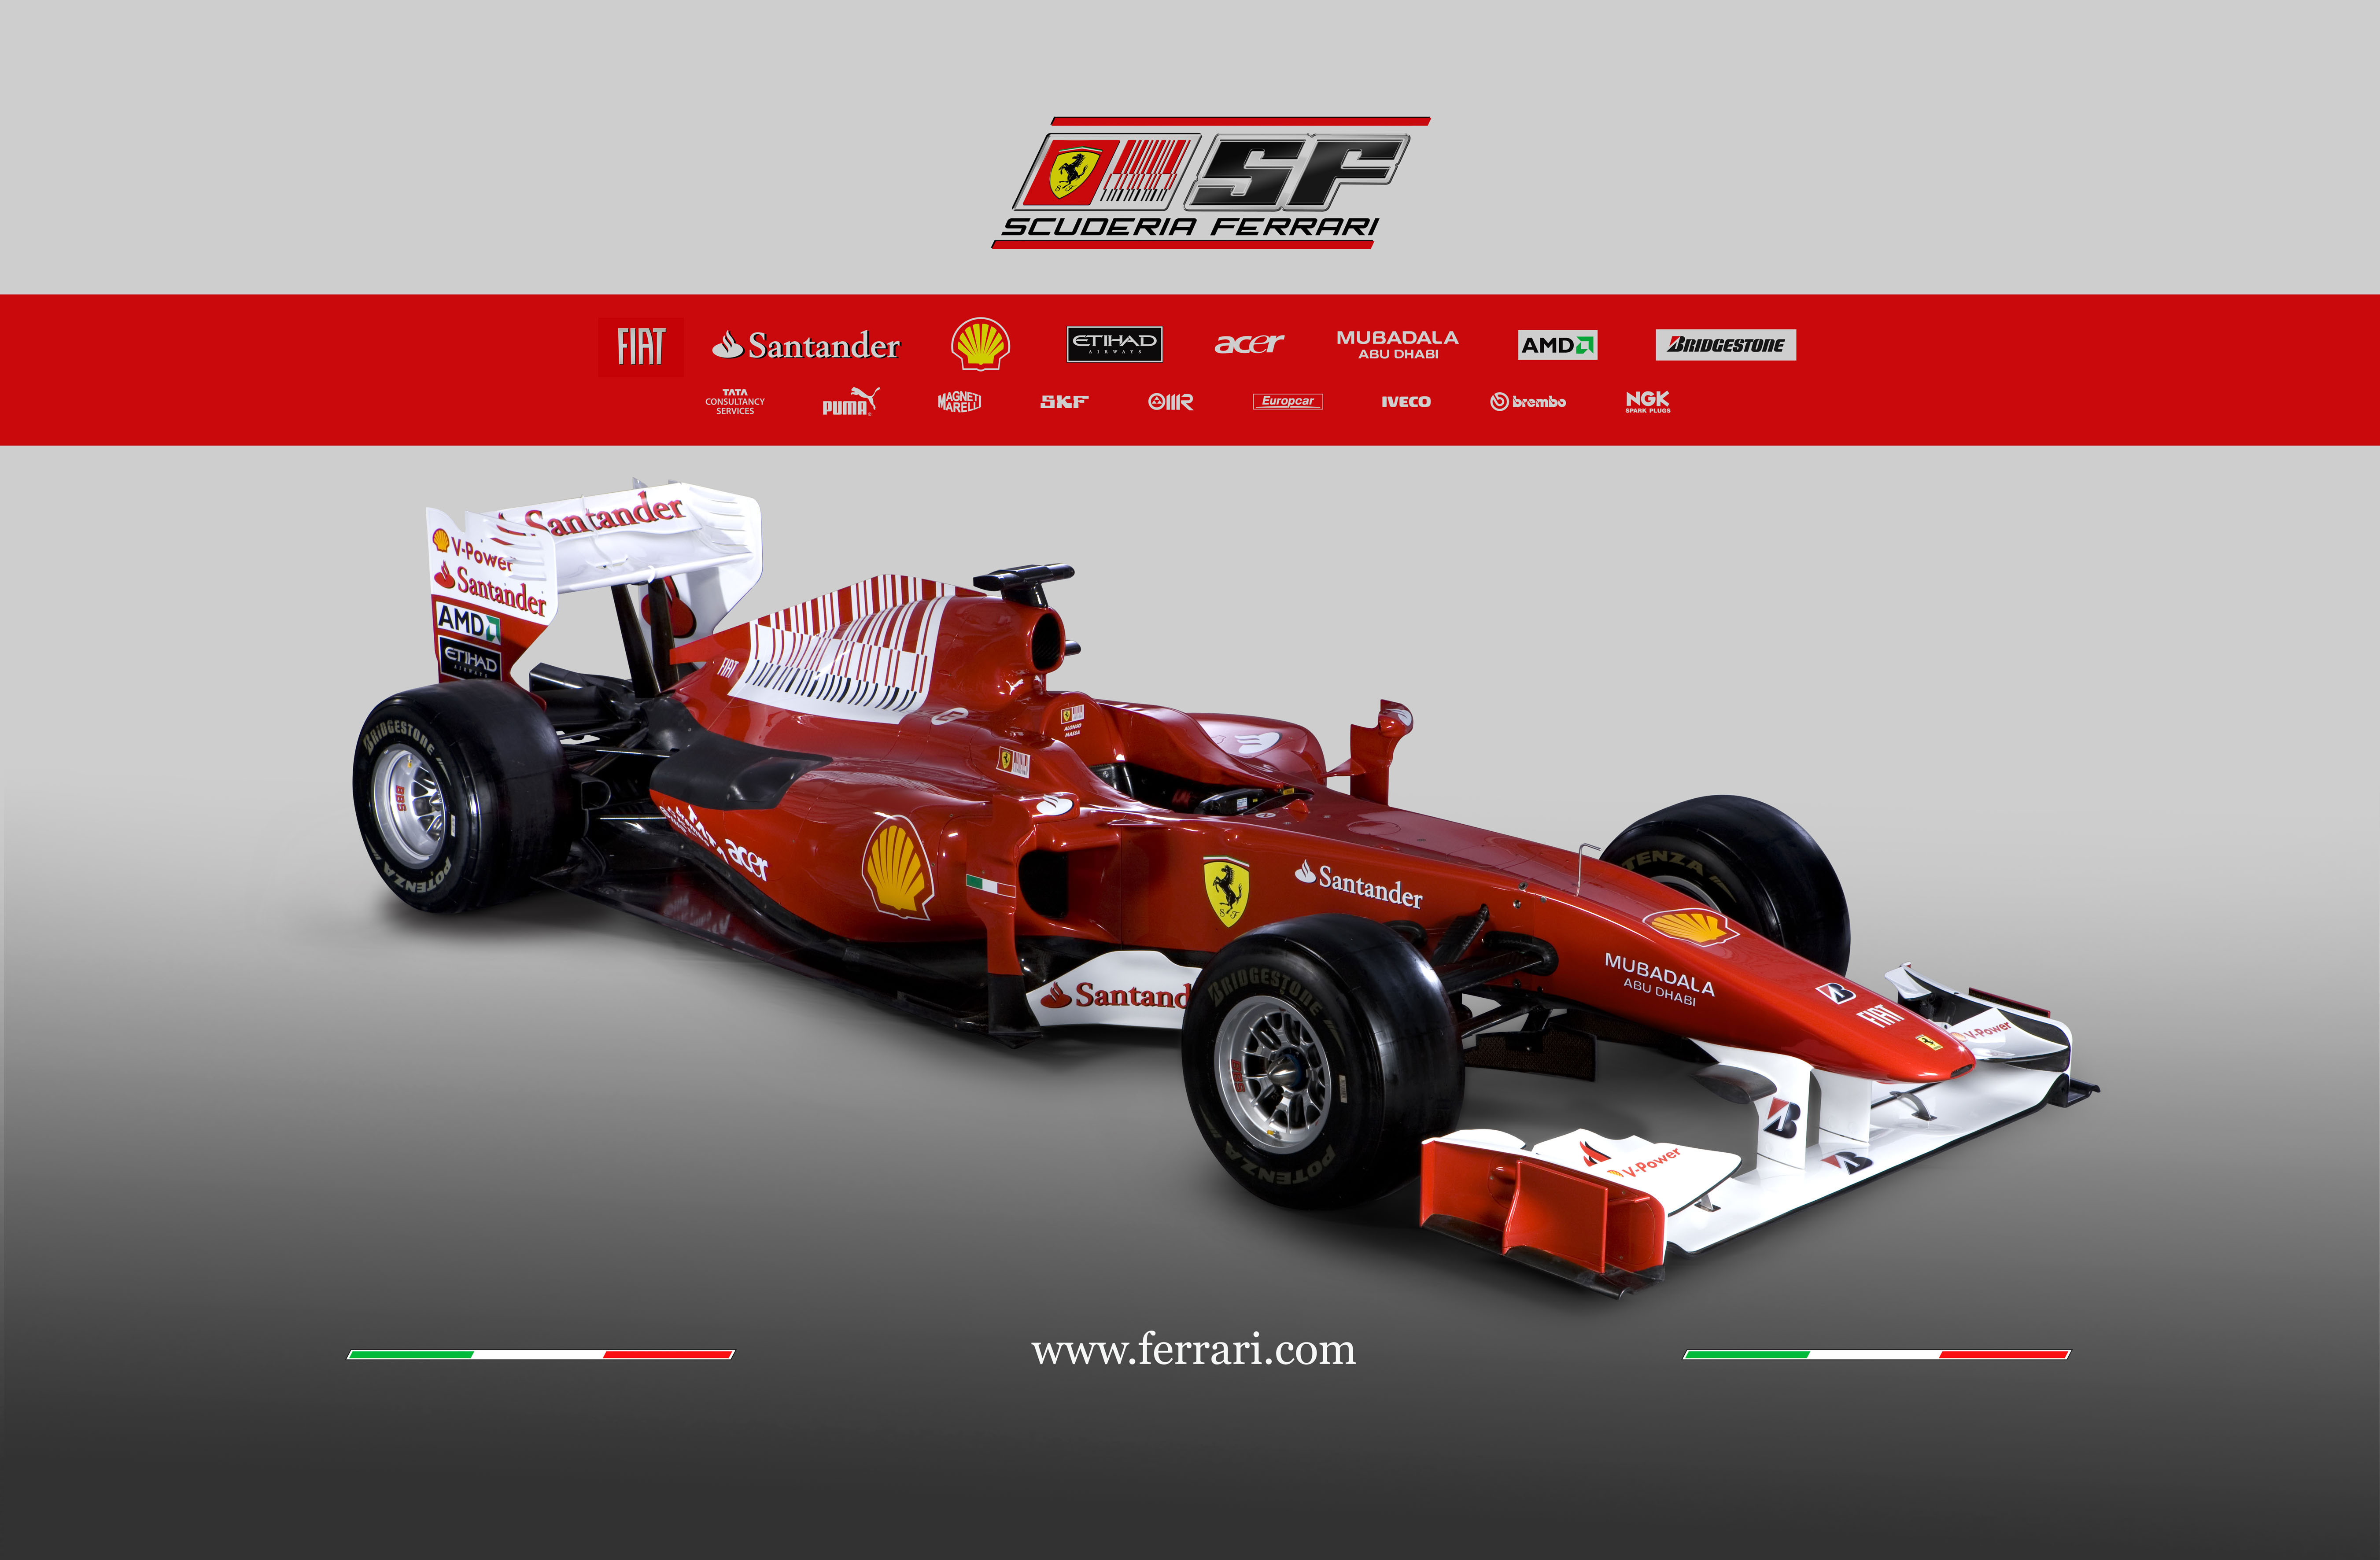 Red Ferrari F10 race car in high-definition wallpaper for sports and Formula 1 enthusiasts.